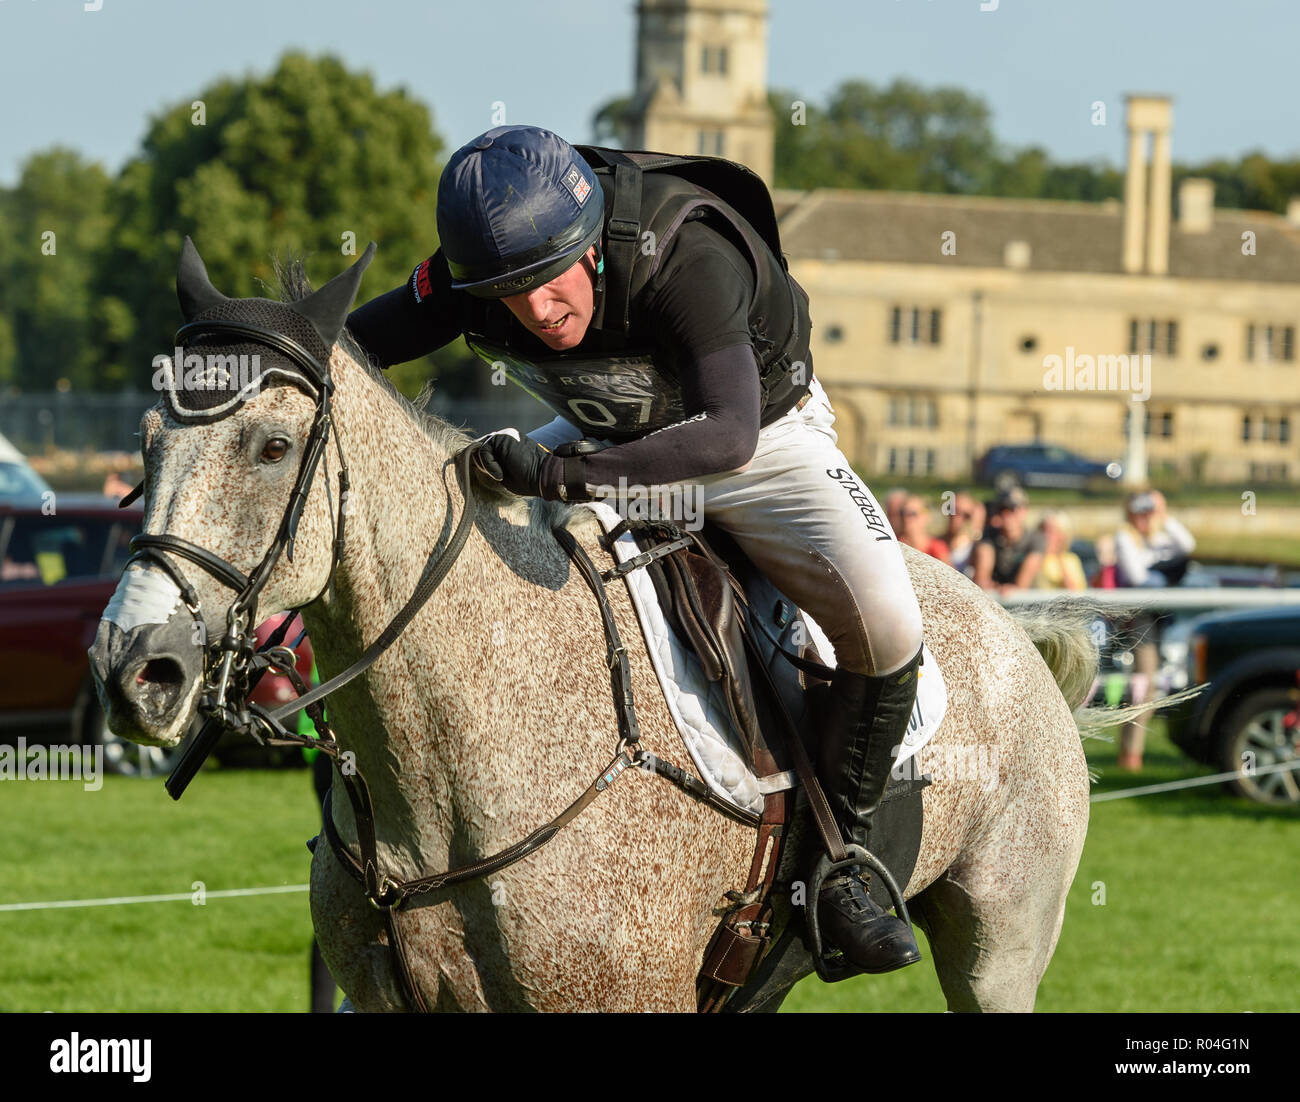 Oliver Townend and BALLAGHMOR CLASS during the cross country phase of the Land Rover Burghley Horse Trials 2018 Stock Photo